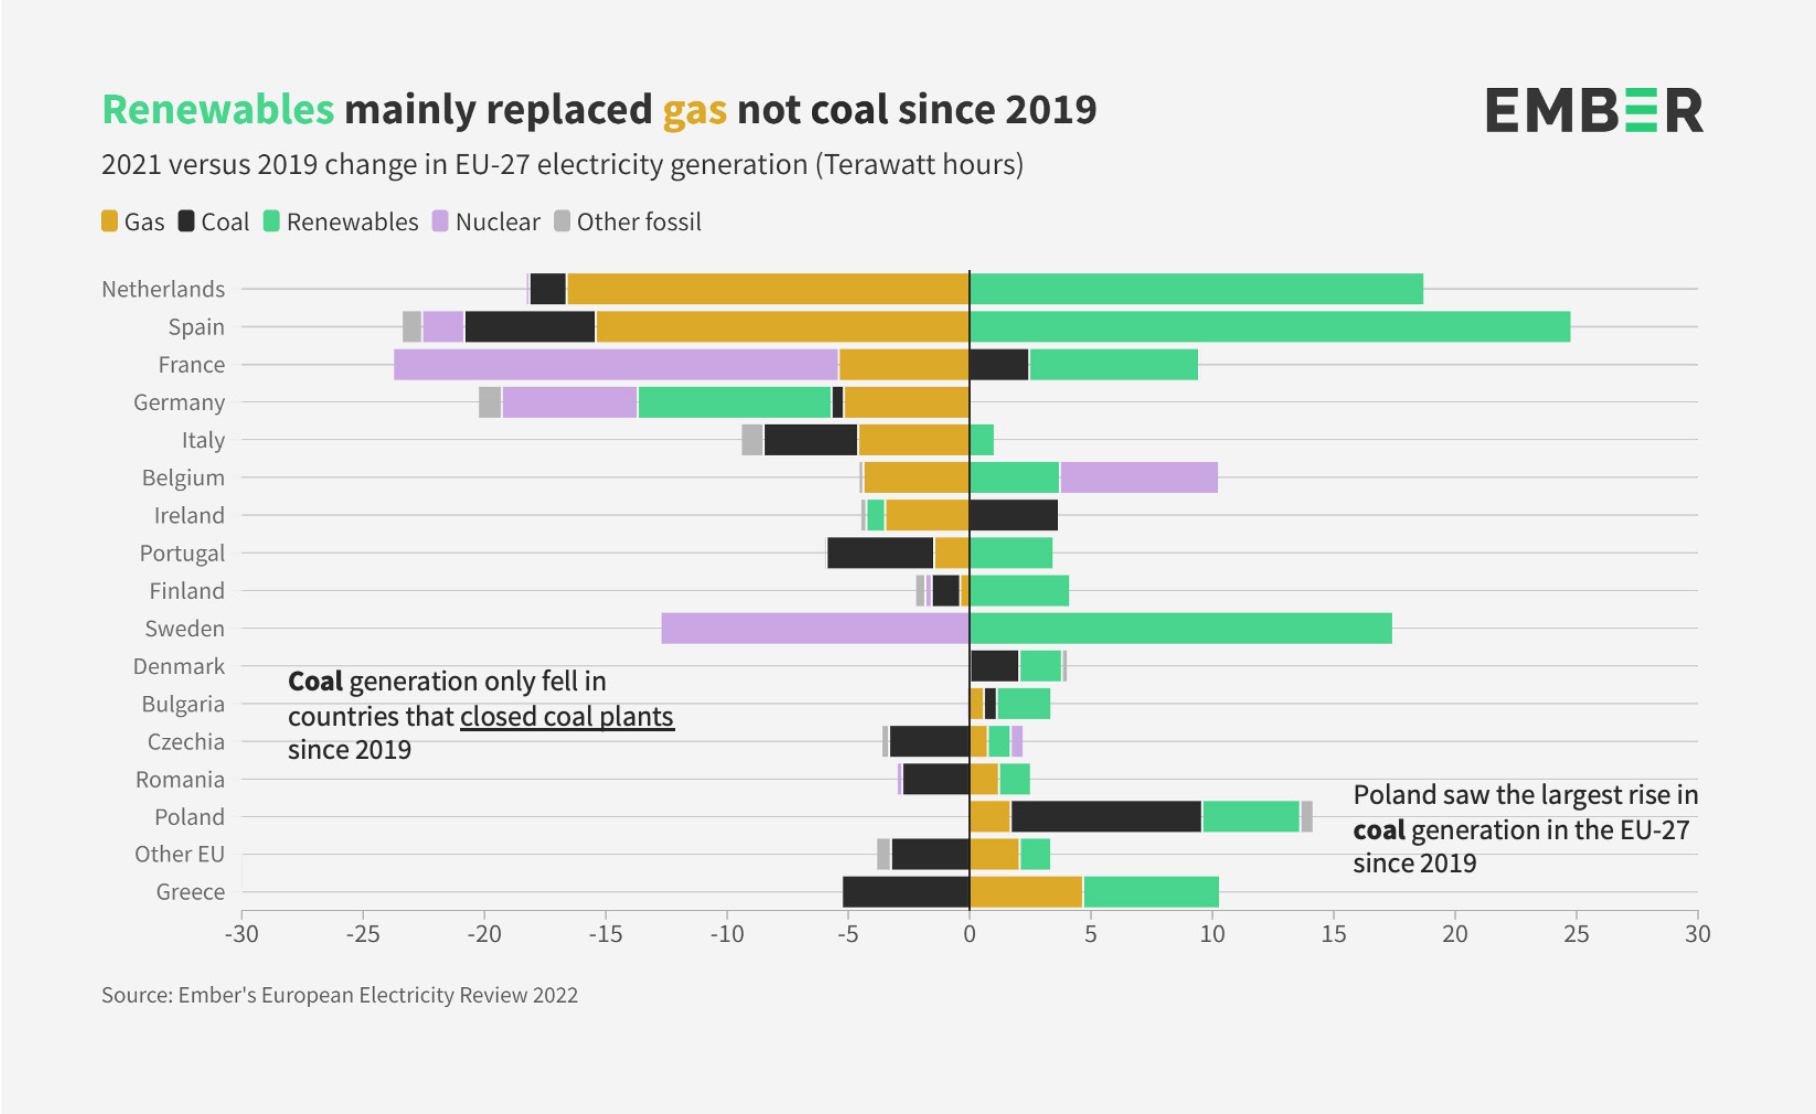 Renewables mainly replaced gas since 2019